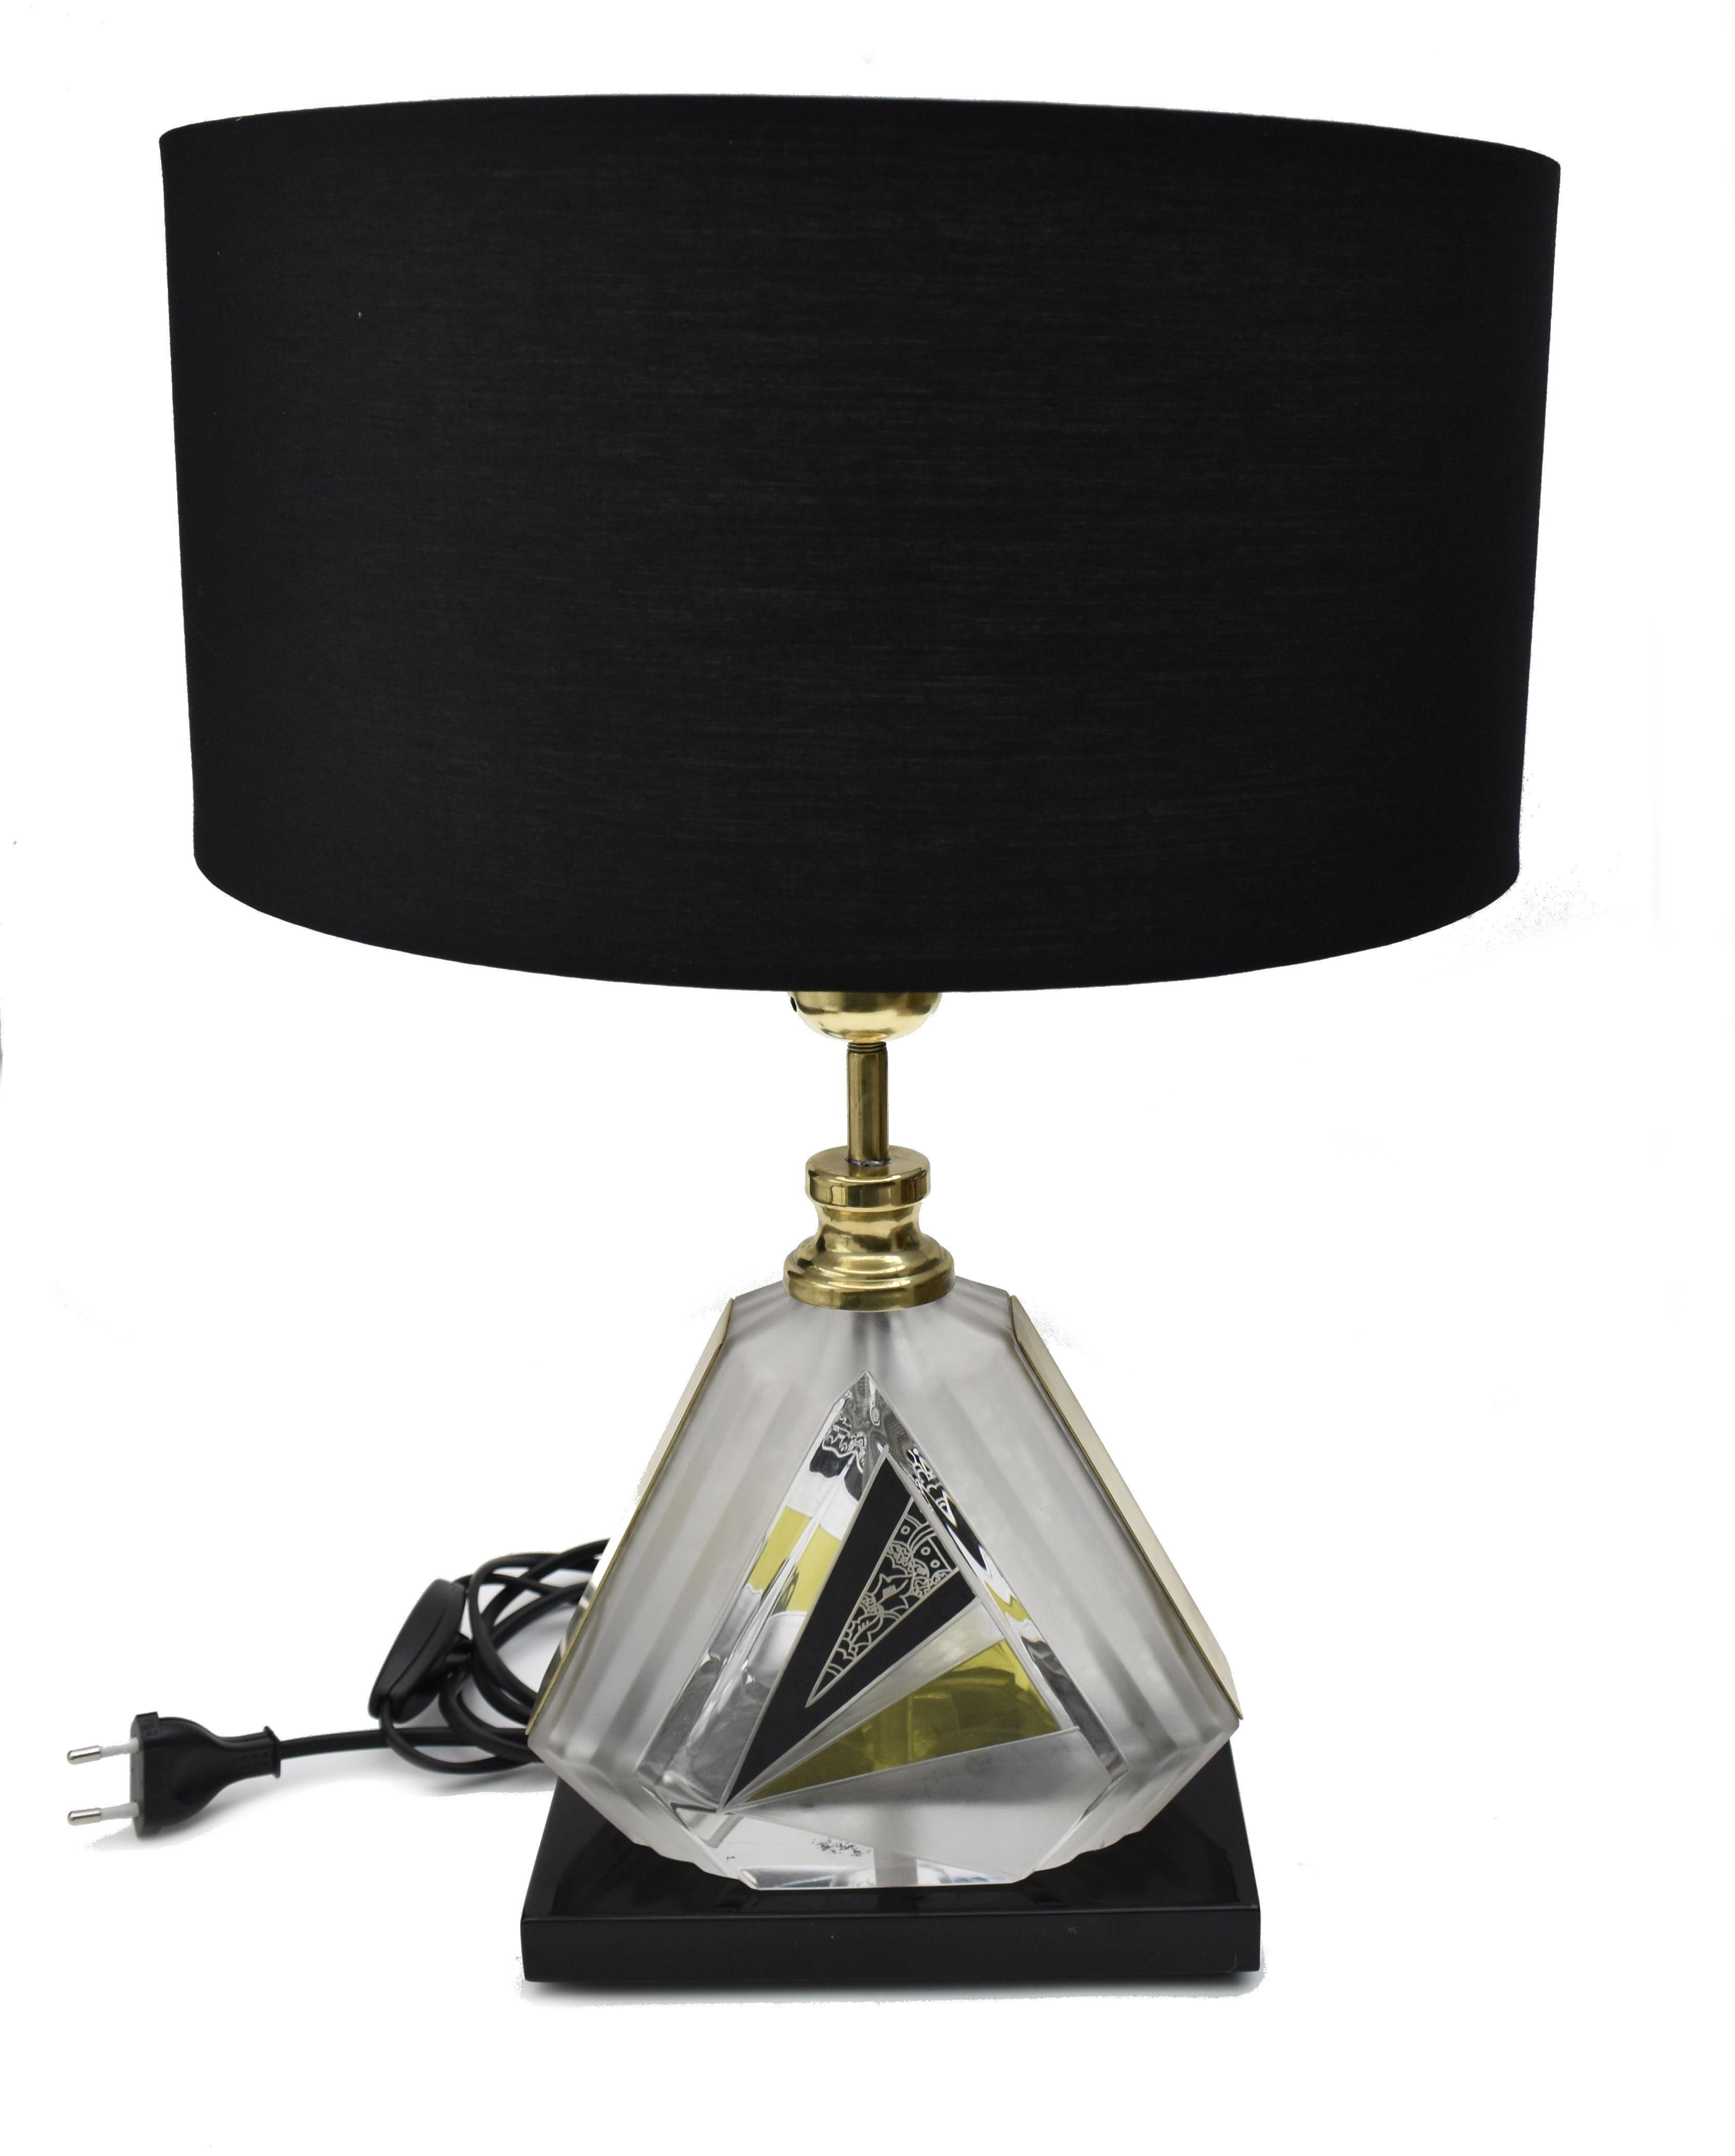 20th Century Art Deco Iconic Glass Table Lamp By Karl Palda, c1930 For Sale